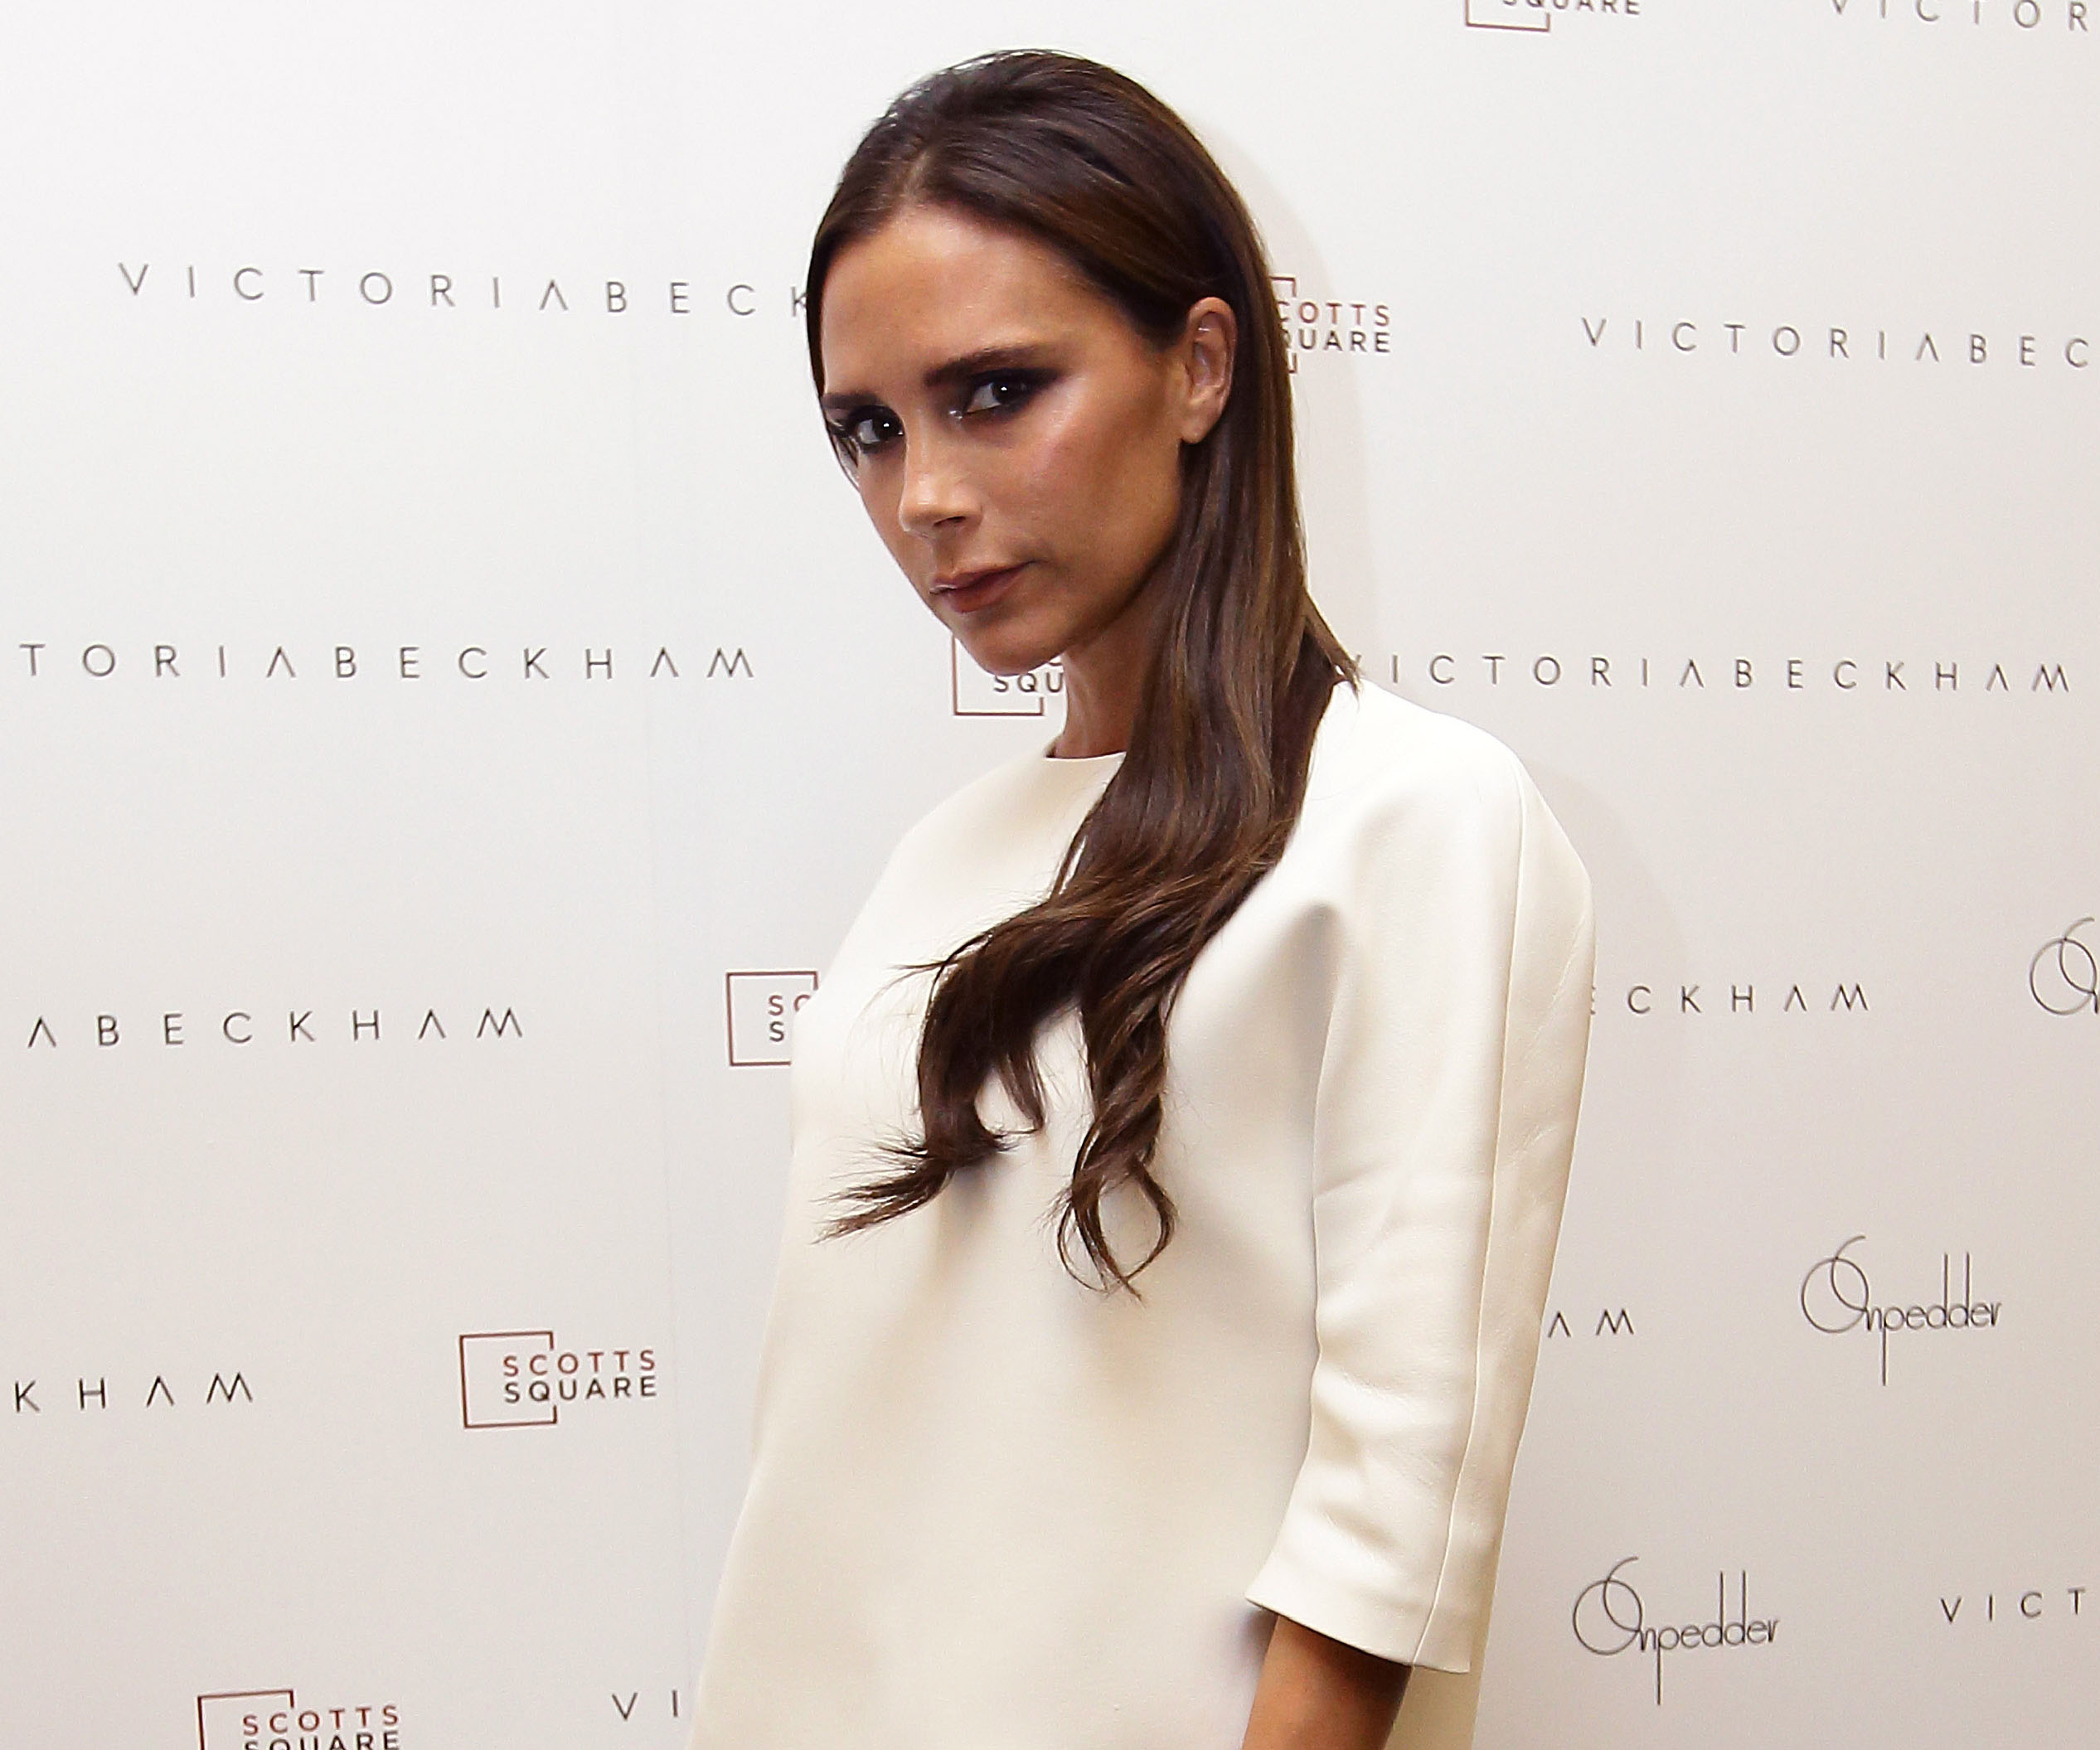 Victoria Beckham doesn’t look like this anymore